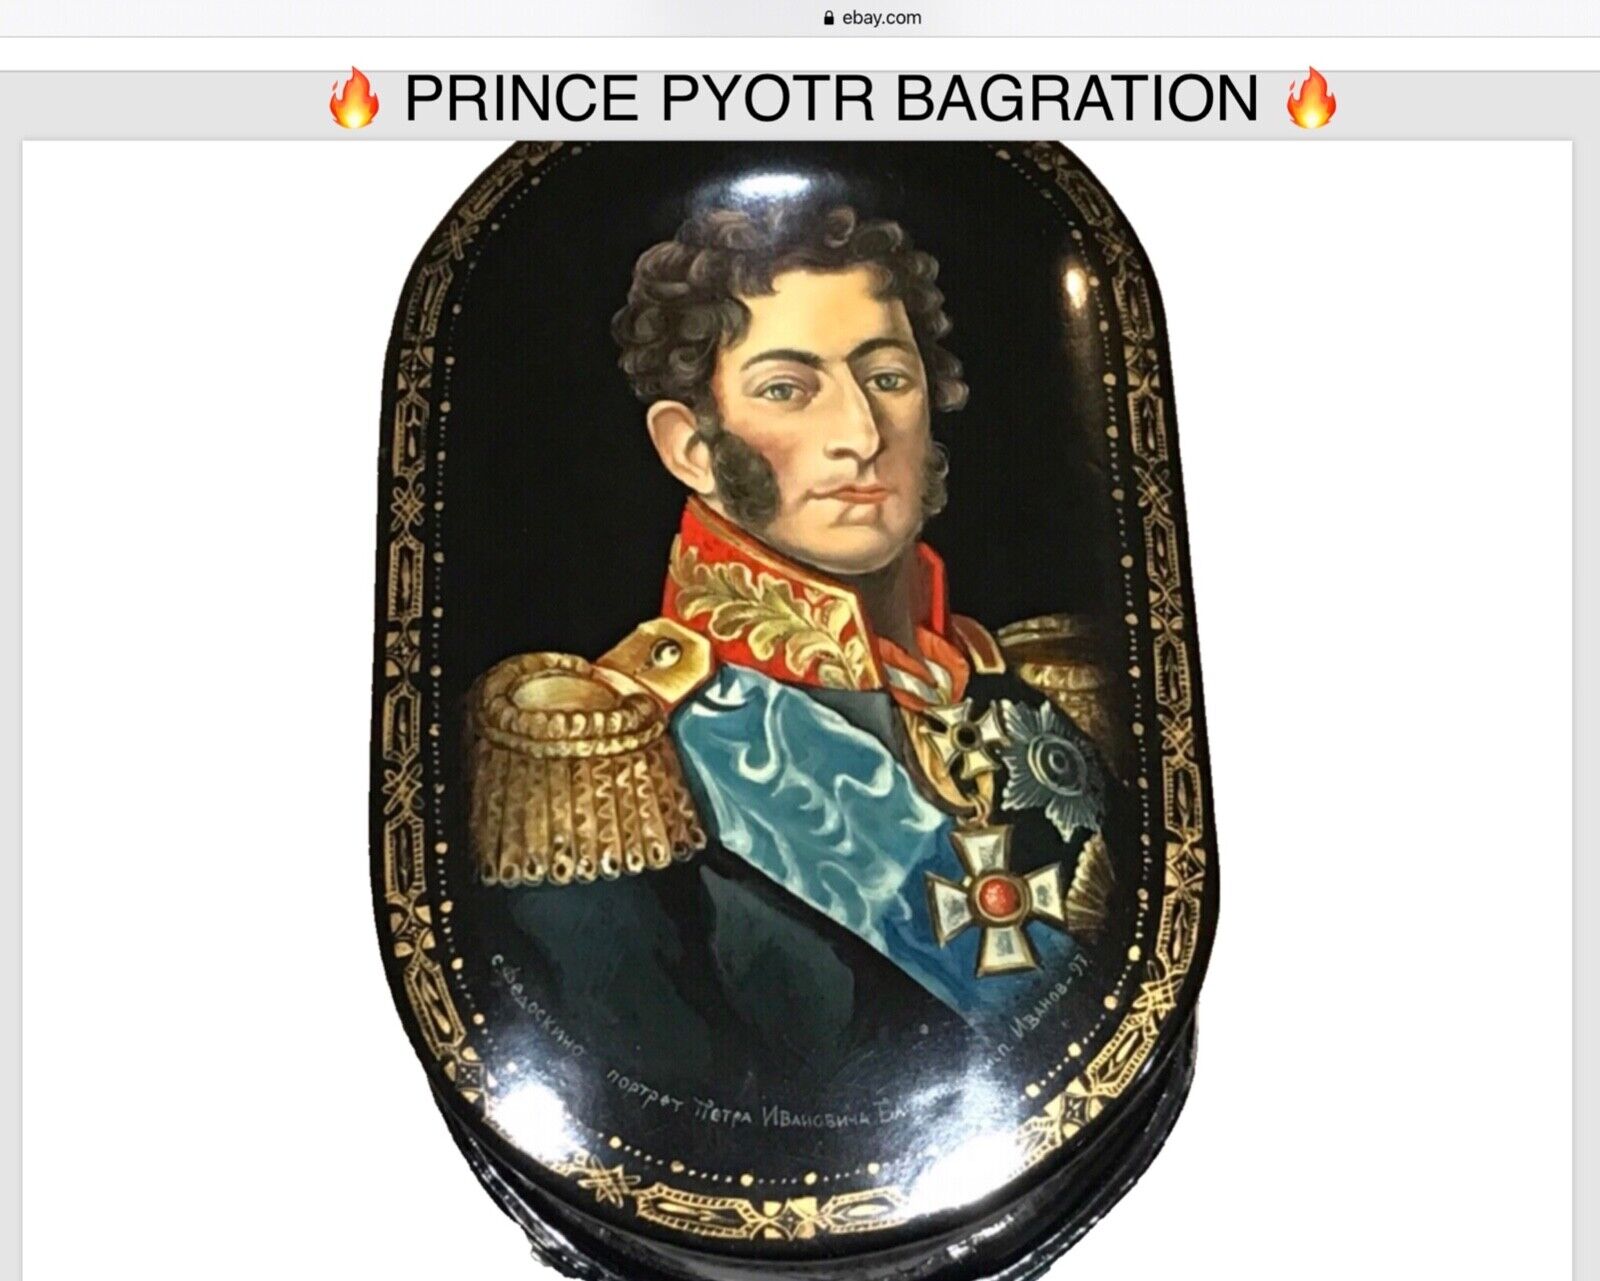 OOAK GENERAL PRINCE PYOTR BAGRATION IMPERIAL RUSSIA FEDOSKINO LACQUER BOX IVANOV